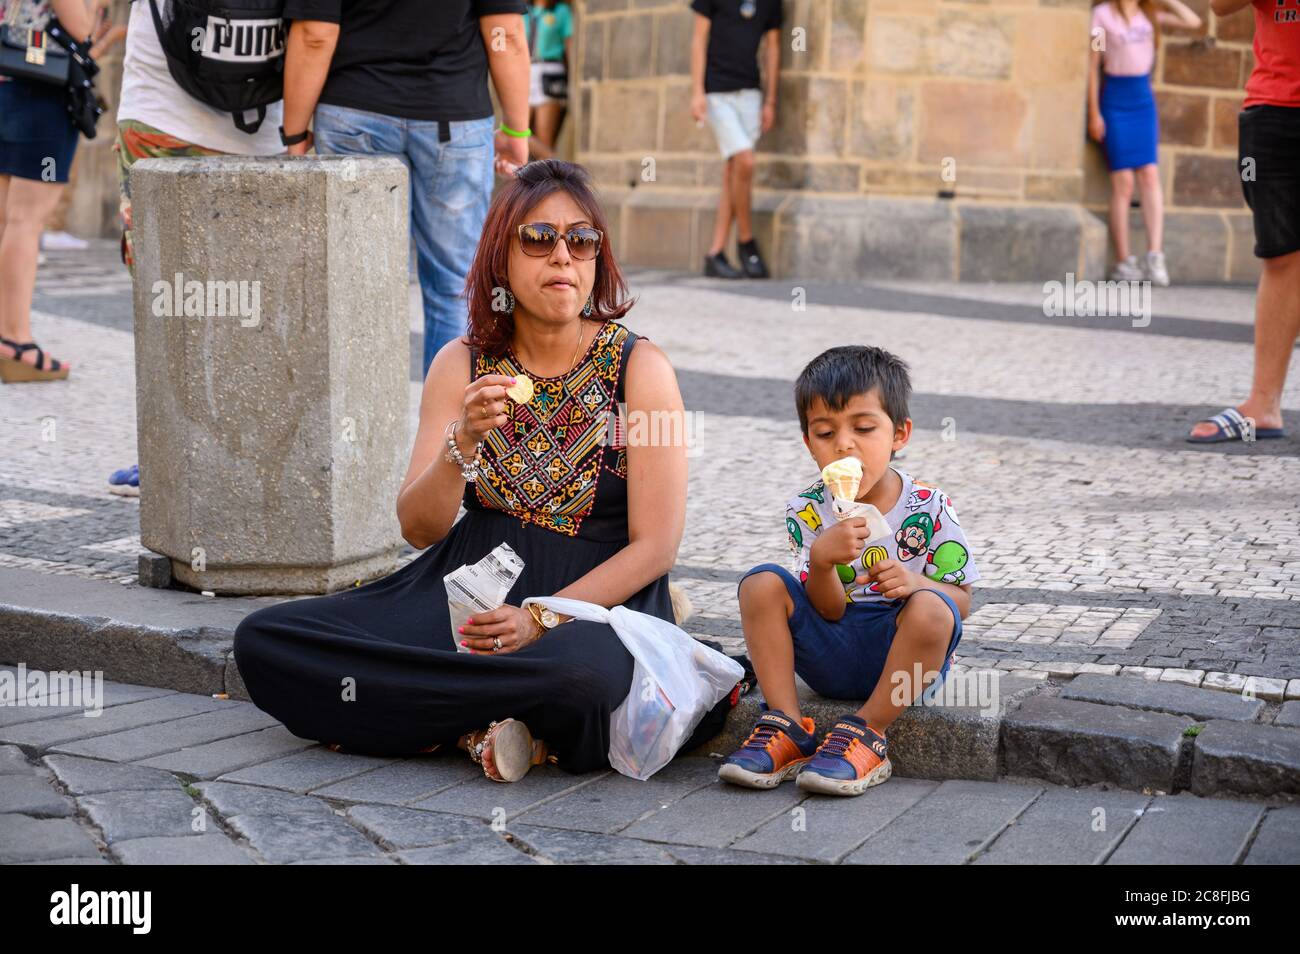 PRAGUE - JULY 20, 2019: A mother and her son sat on a curbside eating snacks Stock Photo